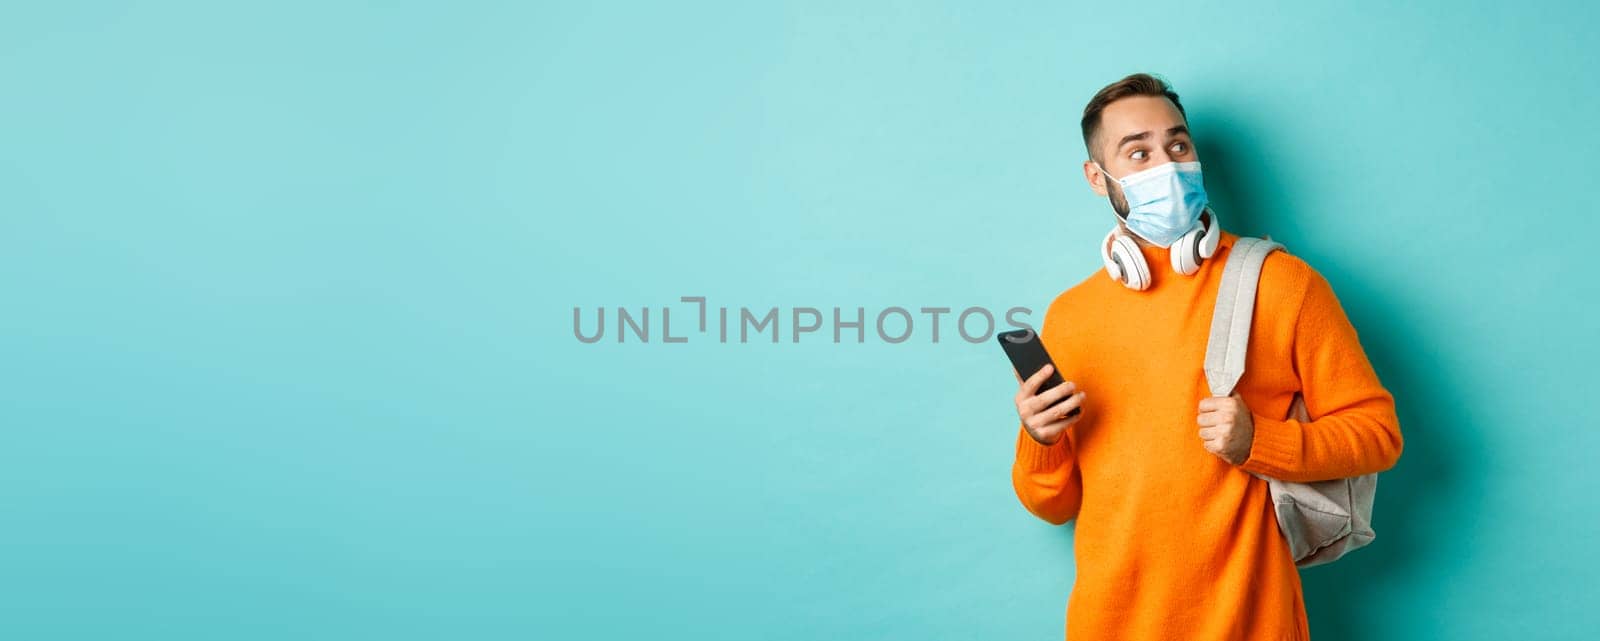 Young man in face mask using mobile phone, holding backpack, staring right amazed, standing against light blue background.